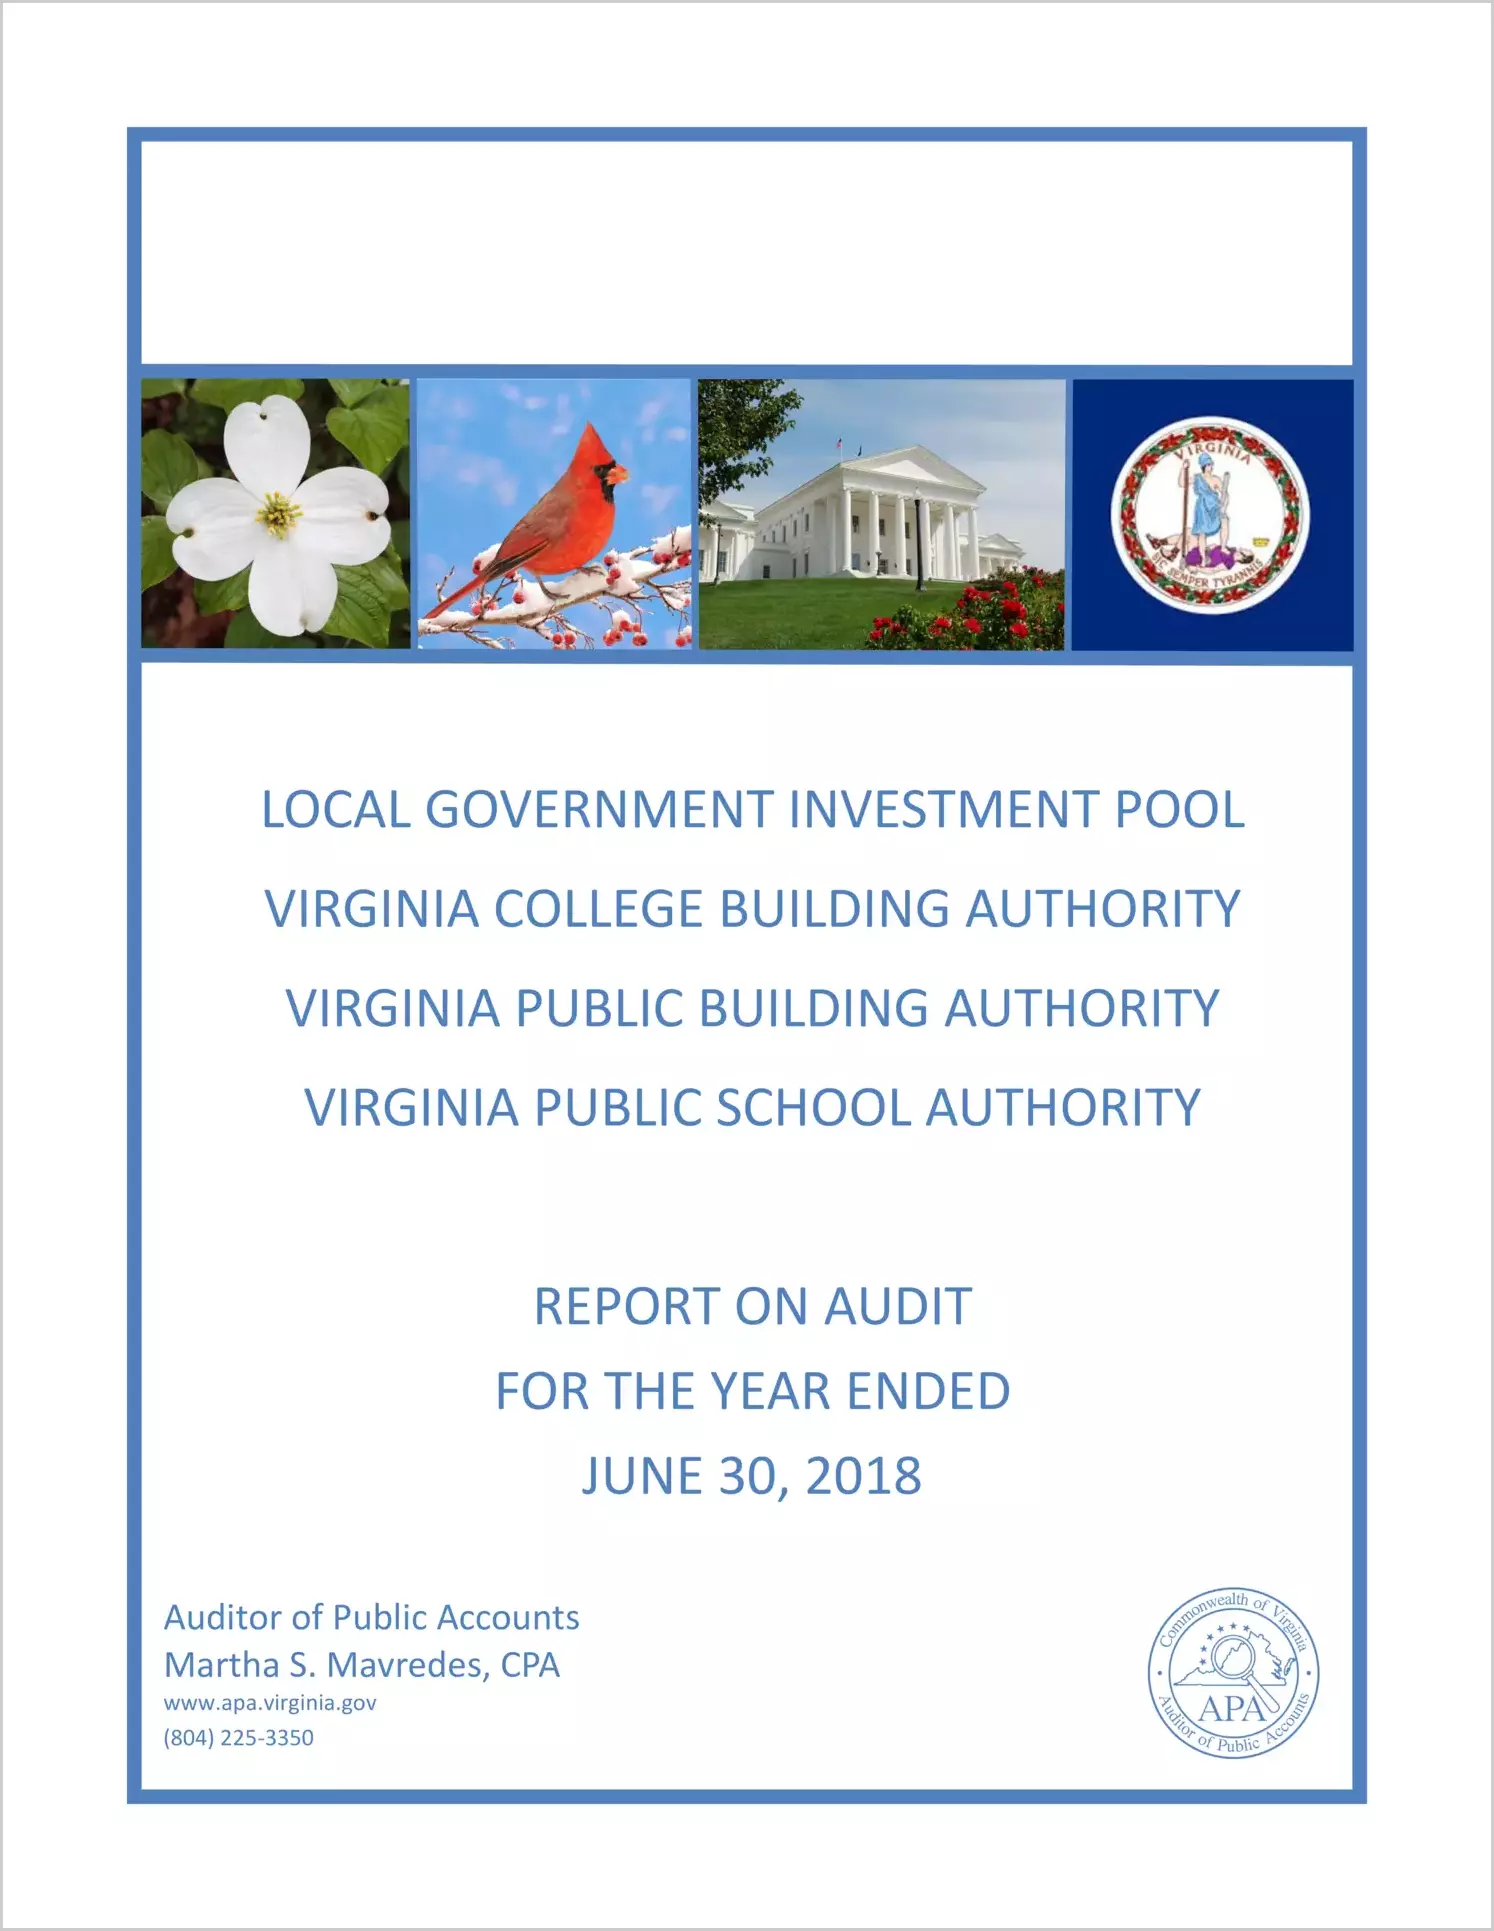 Local Government Investment Pool, Virginia College Building Authority, Virginia Public Building Authority, Virginia Public School Authority for the year ended June 30, 2018